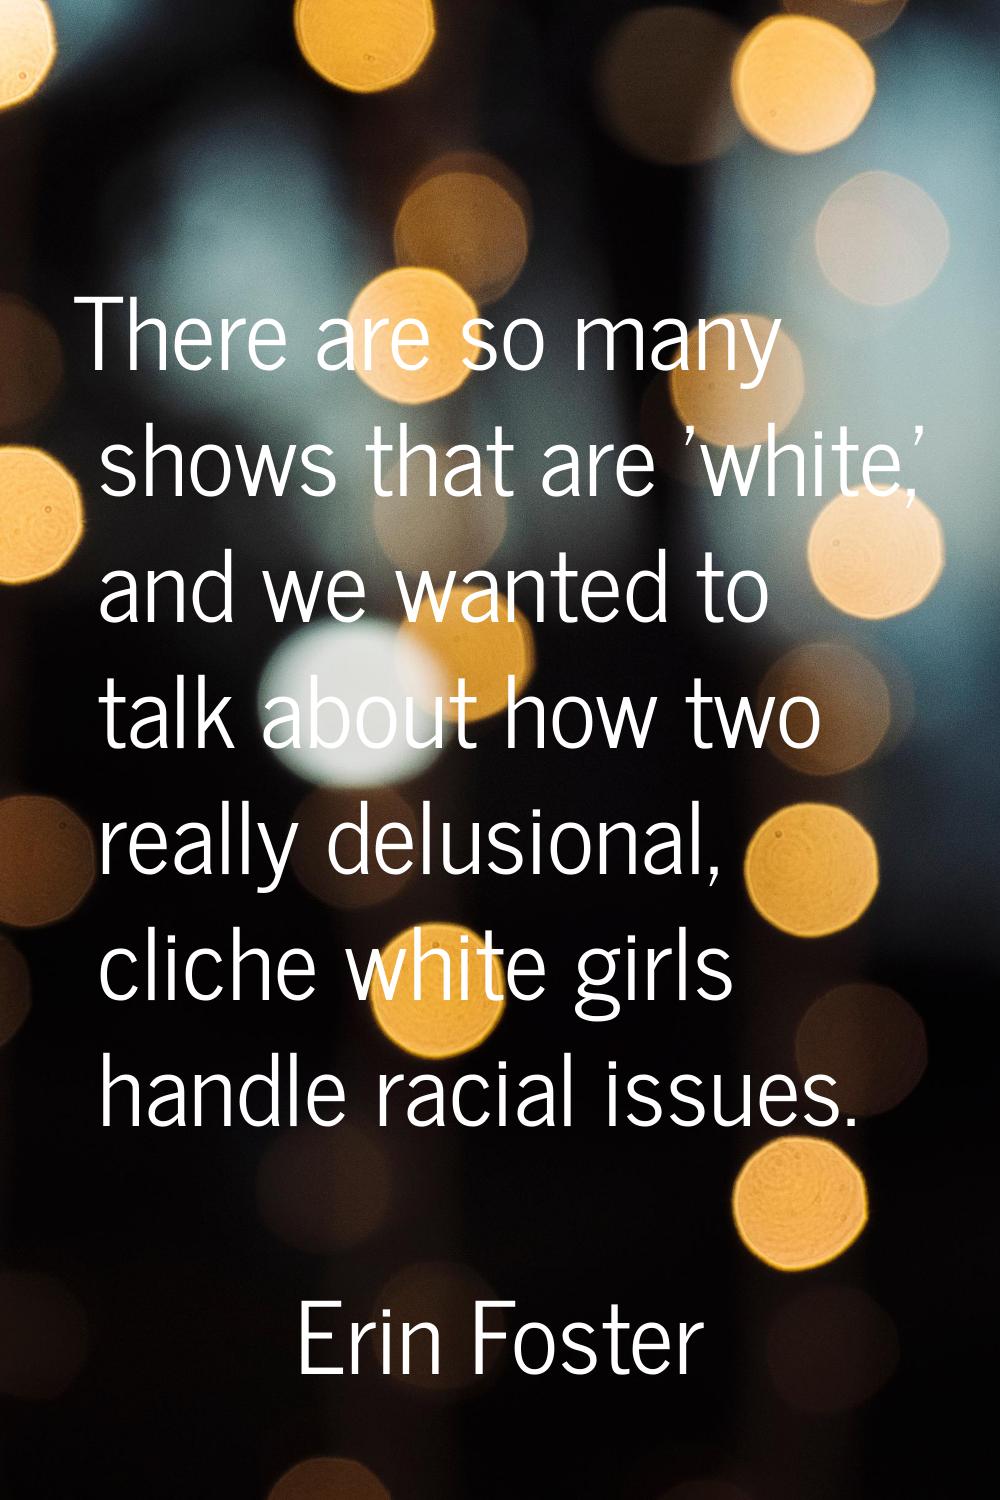 There are so many shows that are 'white,' and we wanted to talk about how two really delusional, cl